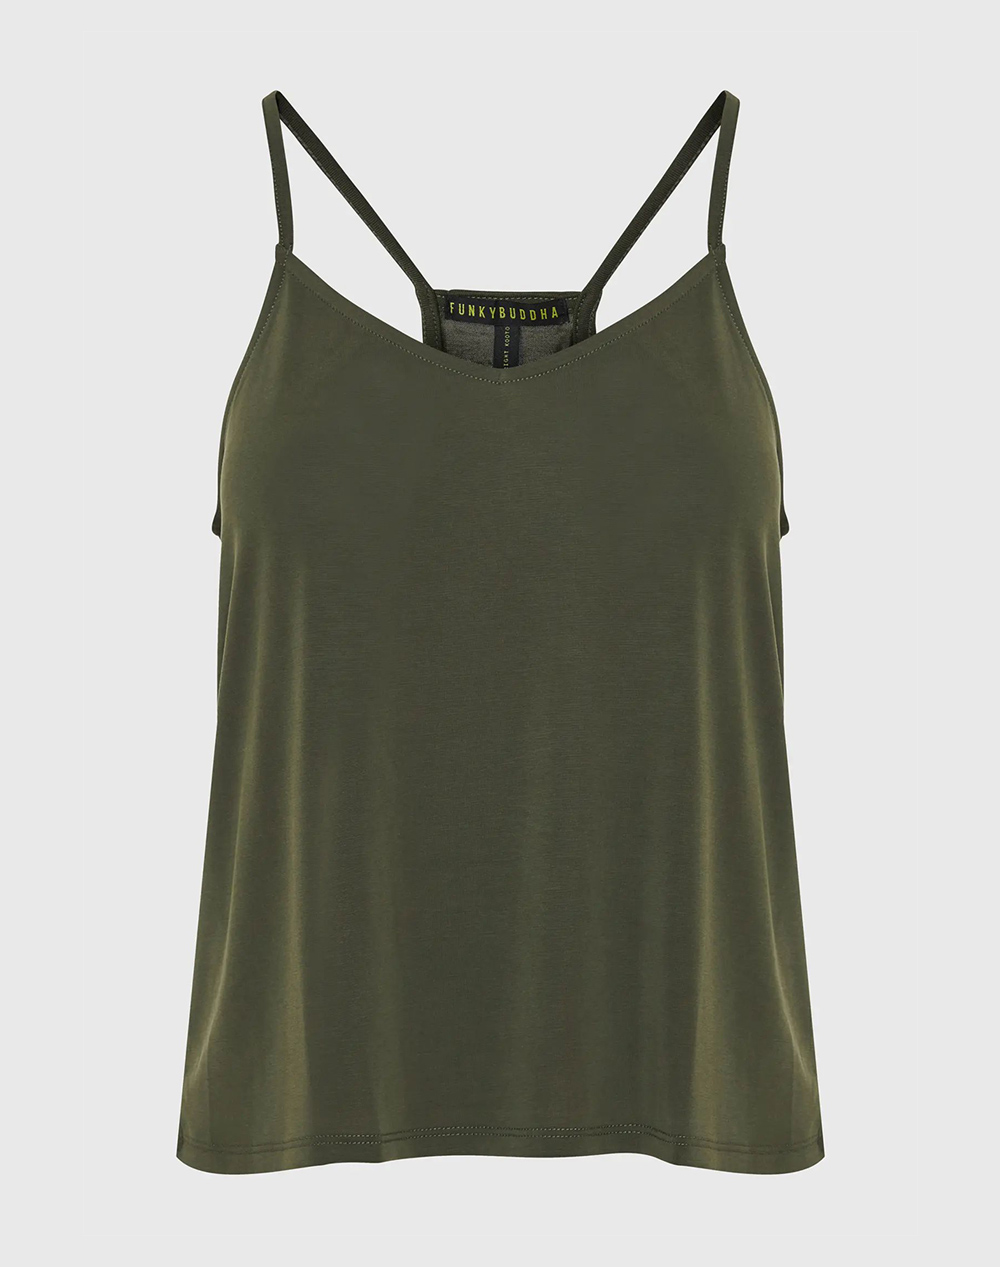 FUNKY BUDDHA Shell top με ανοιχτή πλάτη FBL009-104-17-Olive Branch Olive